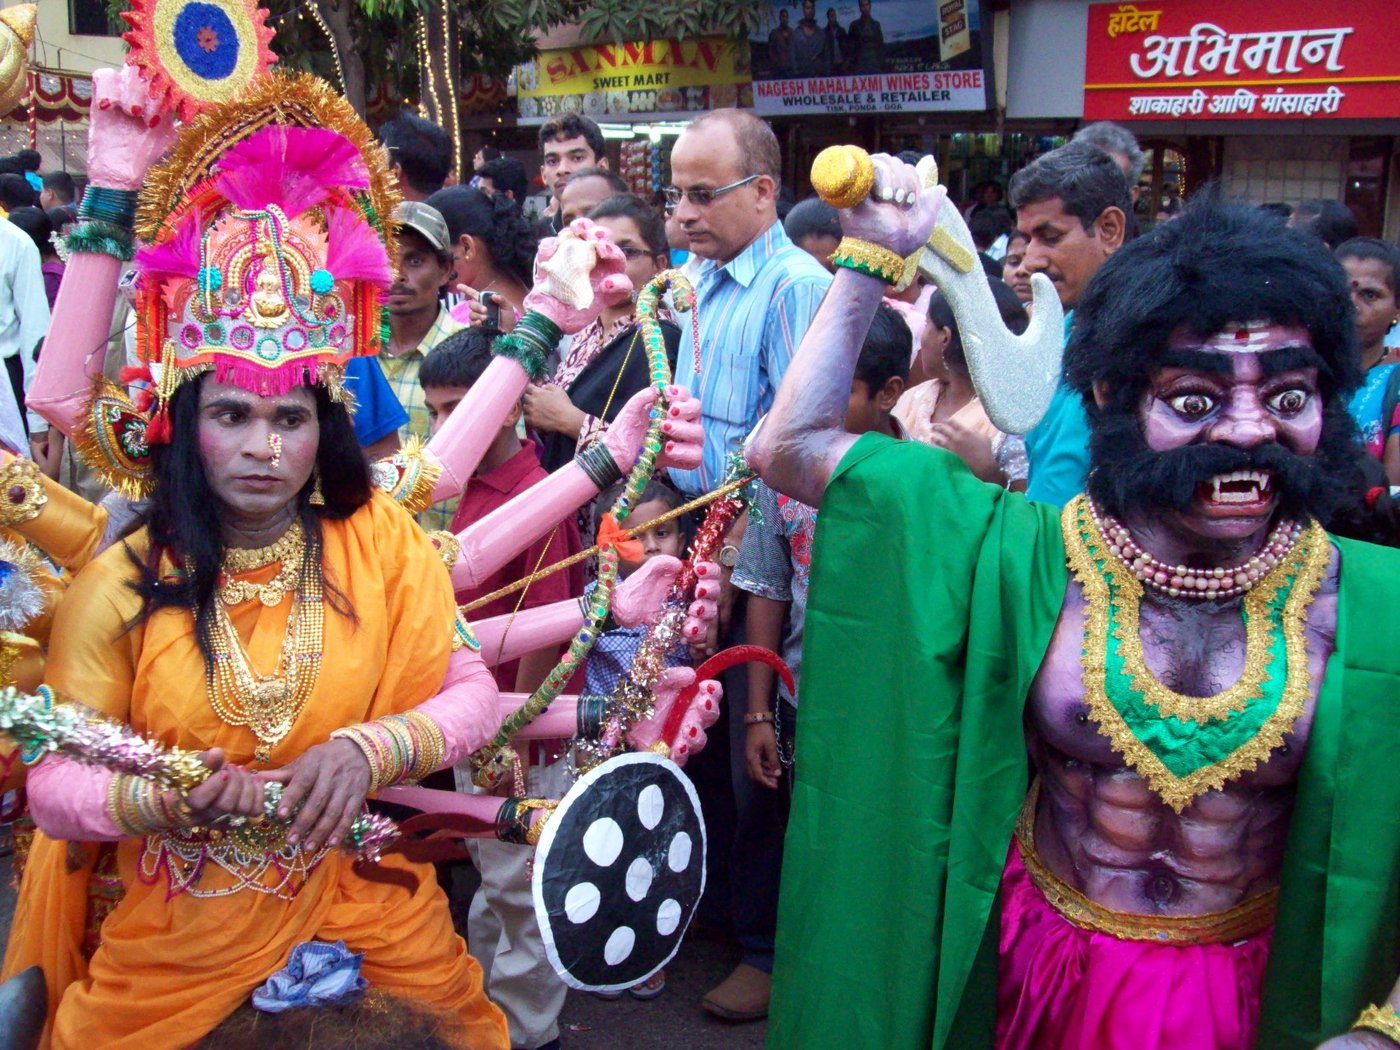 Mythology characters replete with masks in the Shigmo festival